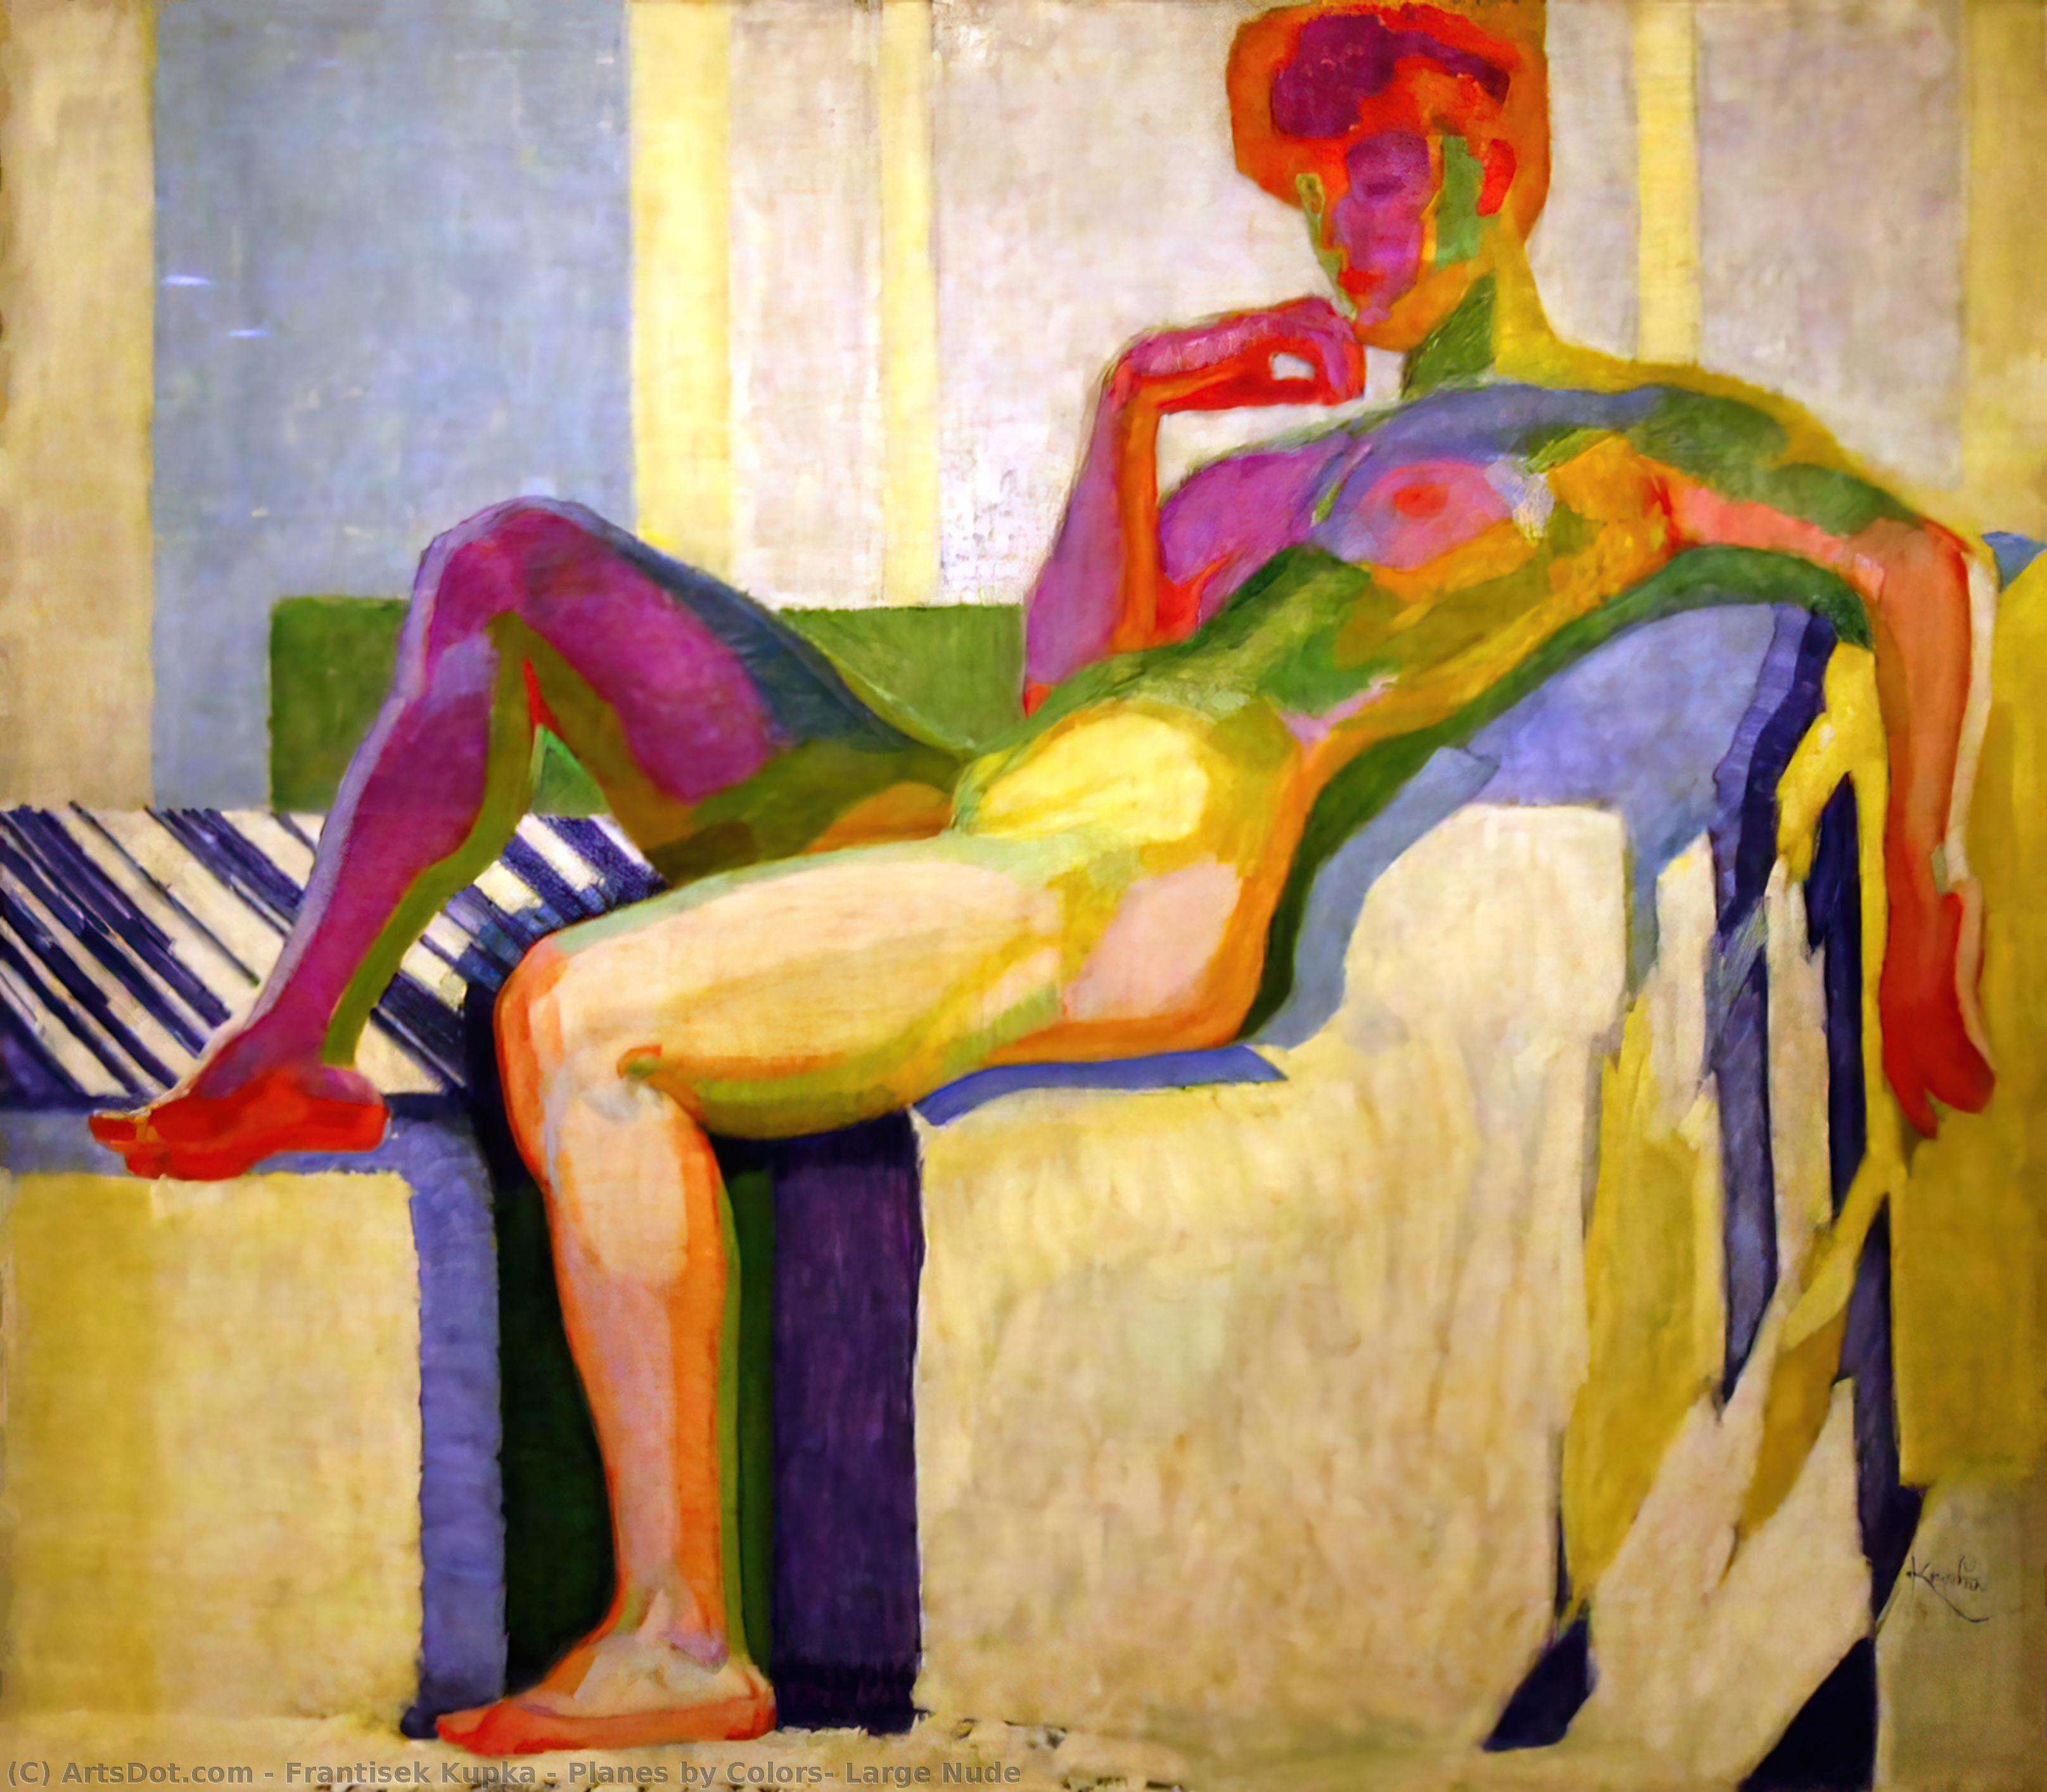 Order Art Reproductions Planes by Colors, Large Nude, 1910 by Frantisek Kupka (Inspired By) (1871-1957, Czech Republic) | ArtsDot.com